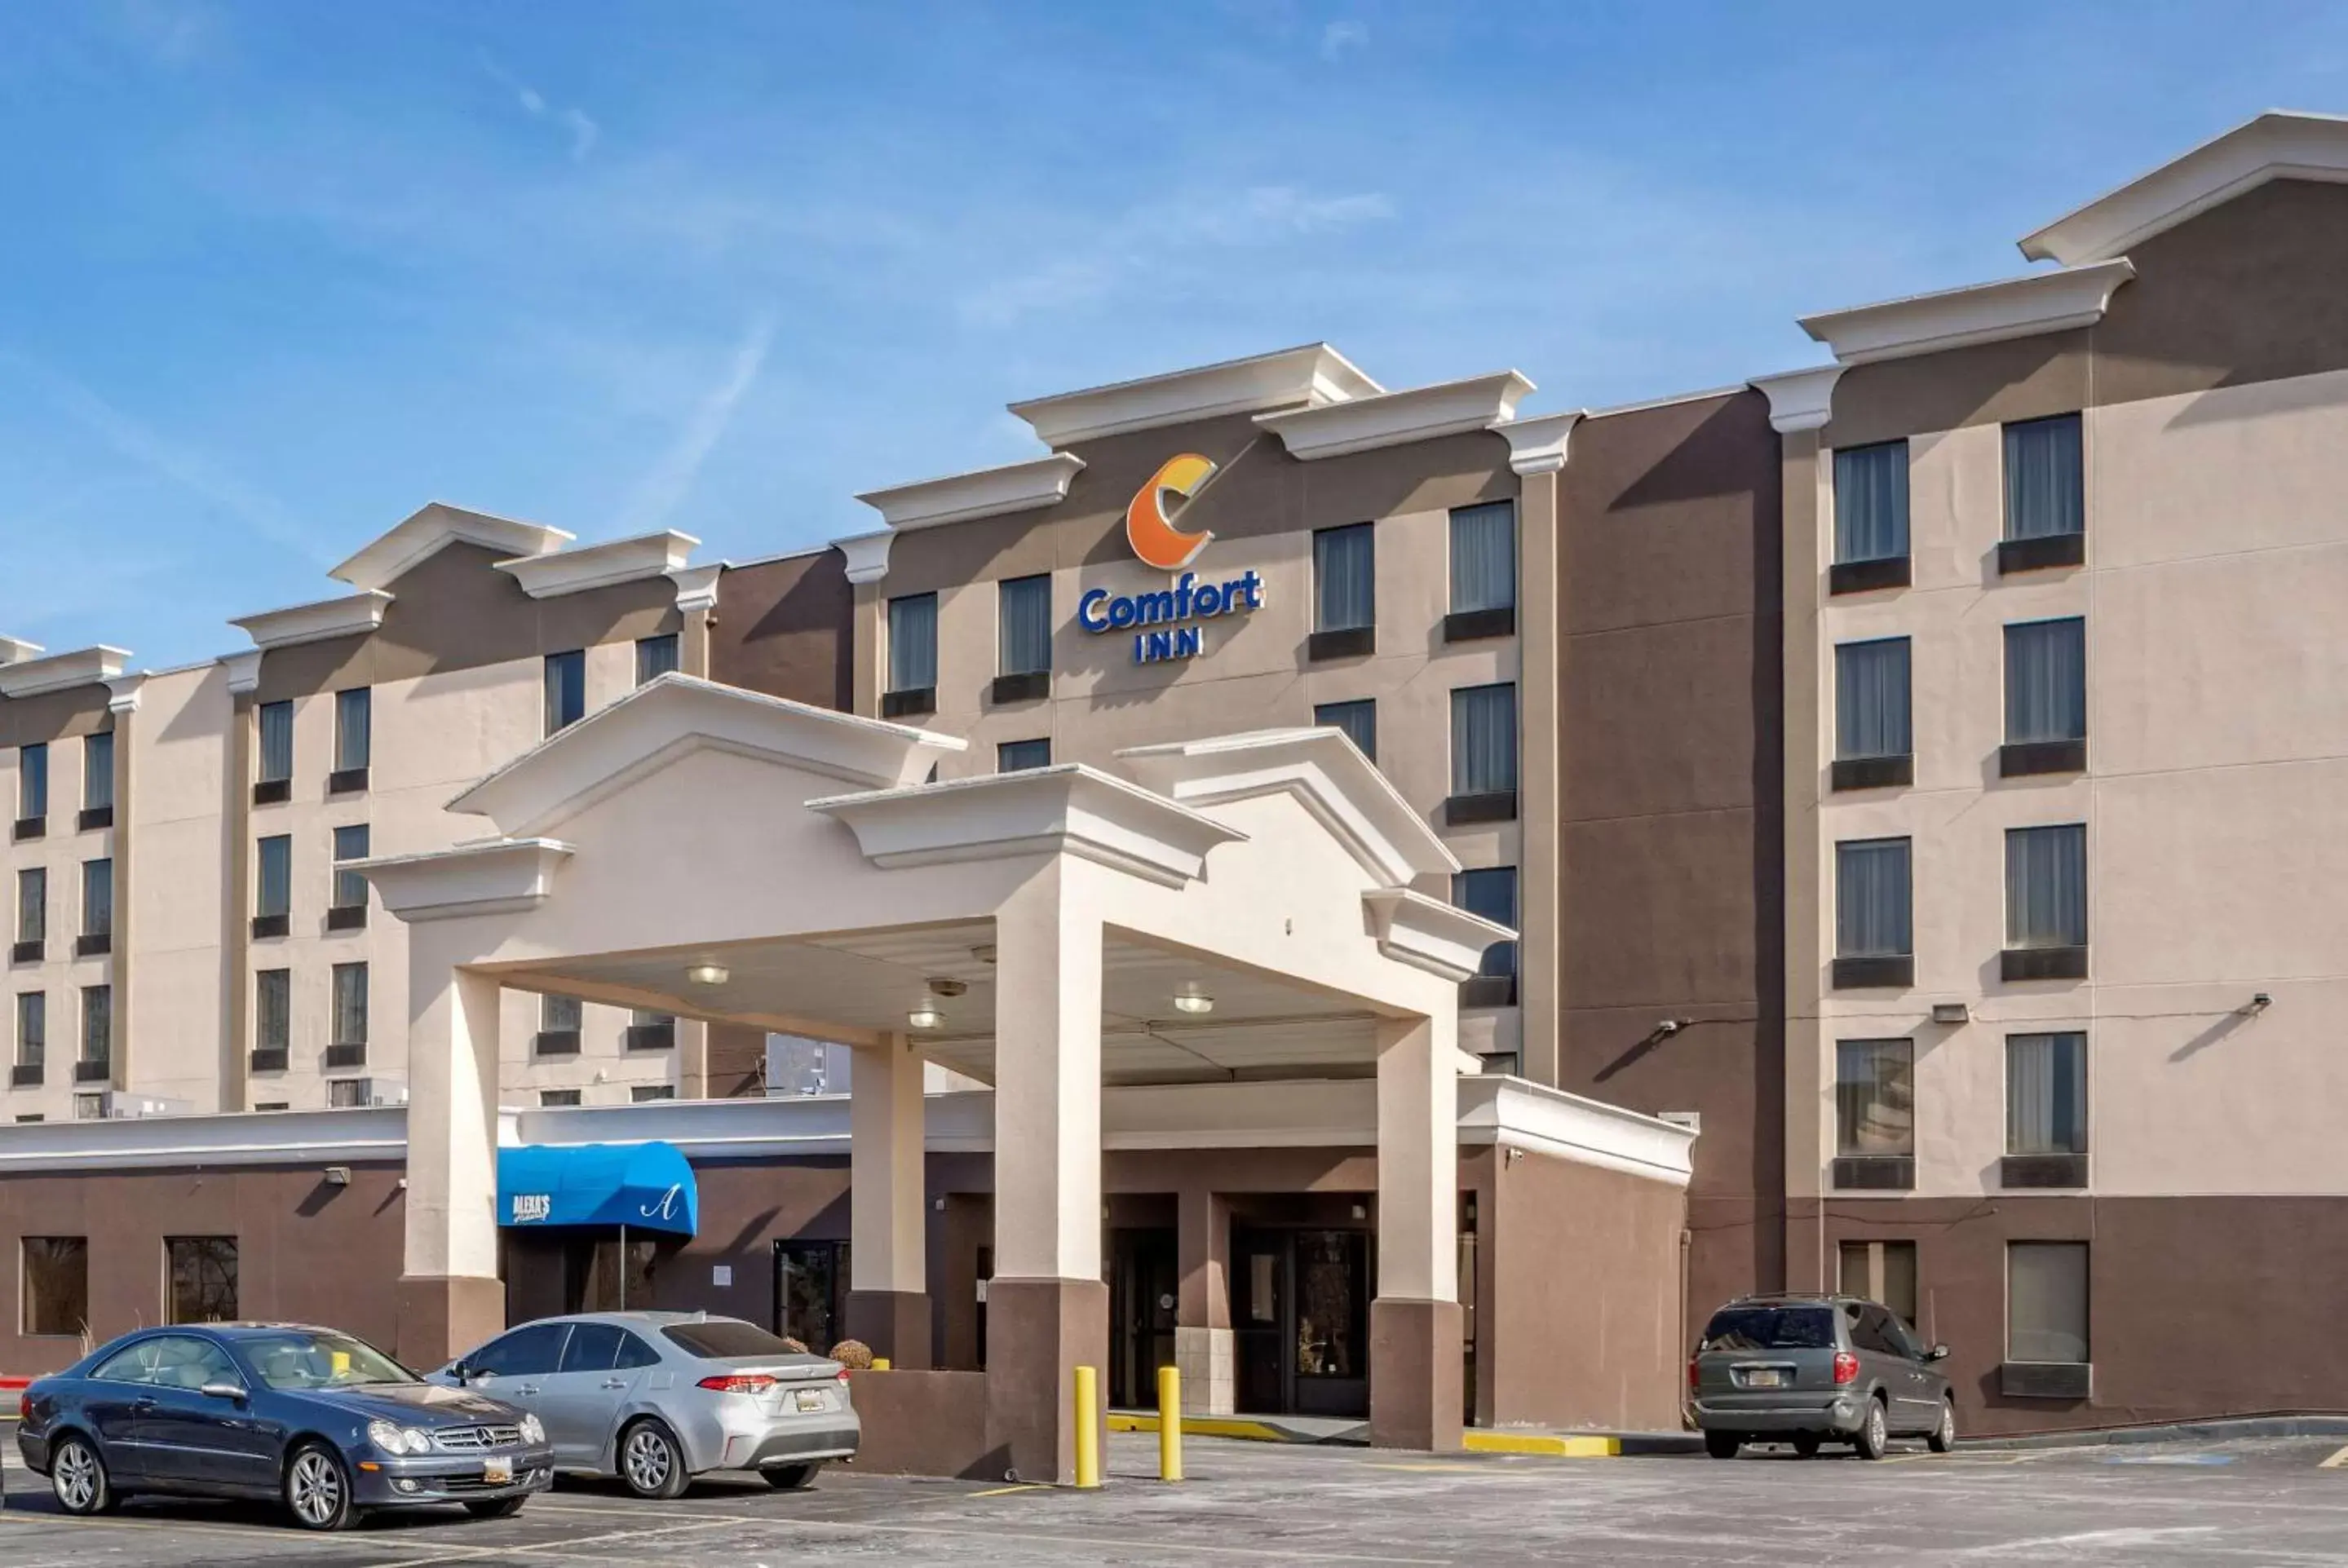 Property Building in Comfort Inn Towson